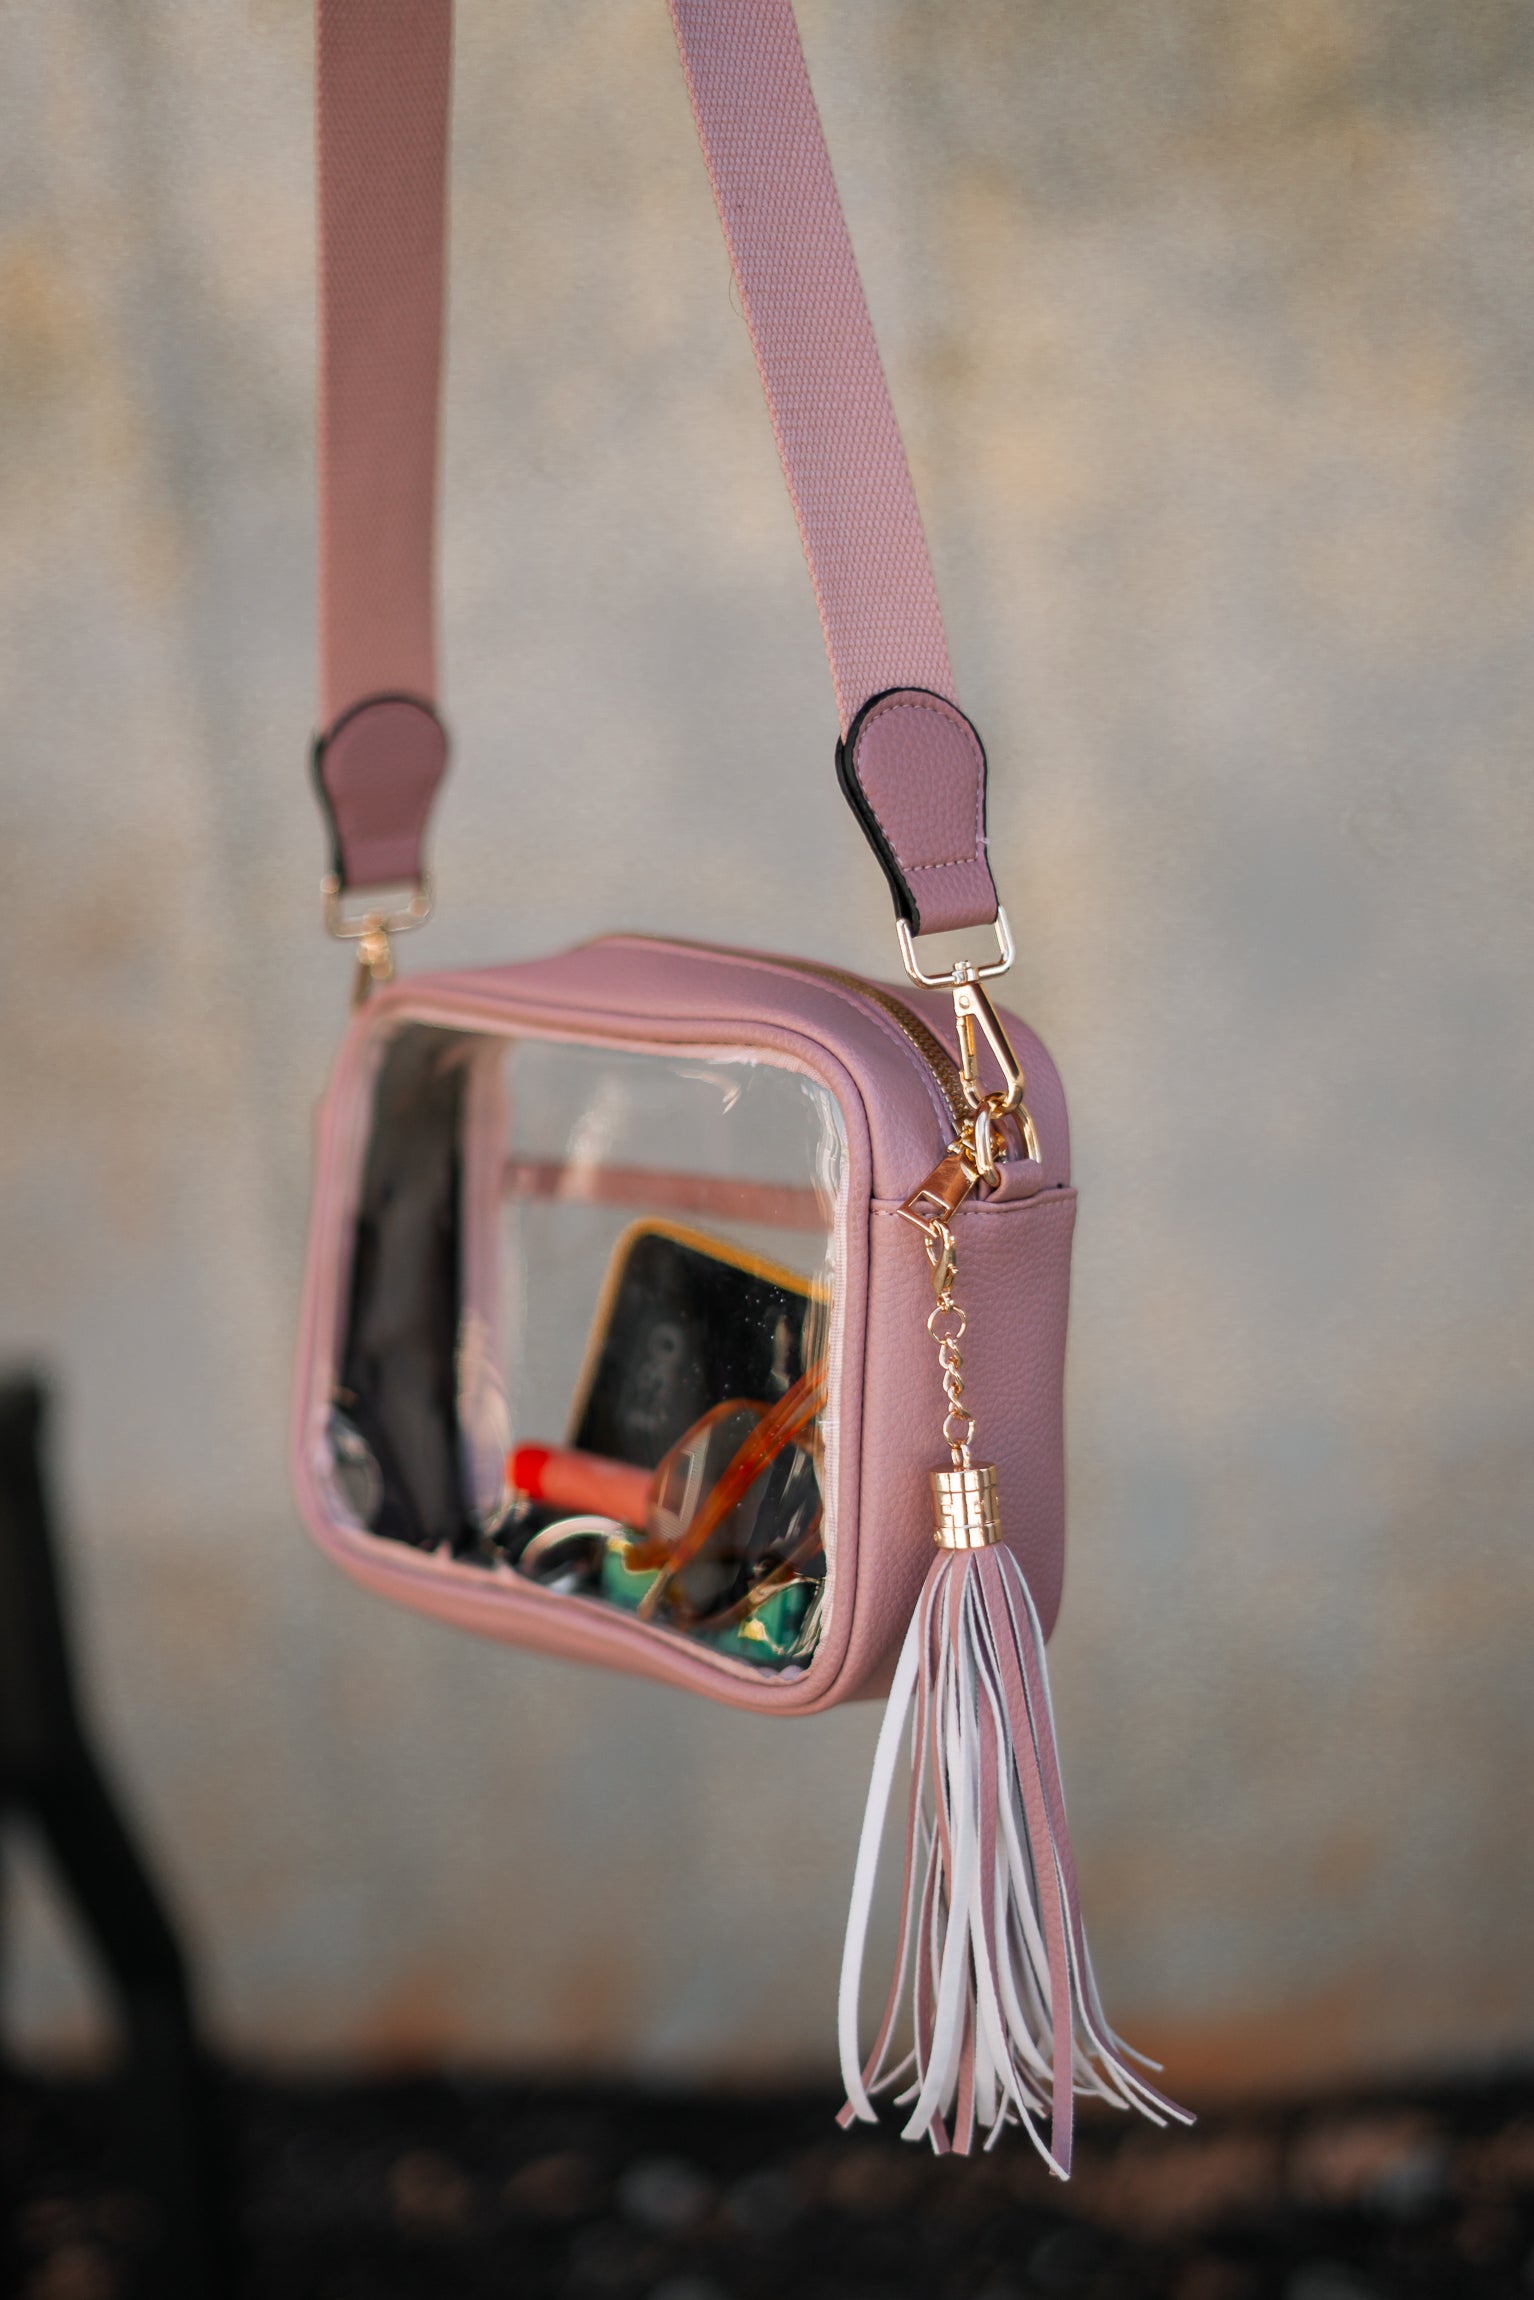 Image shows up close image of the Tiffany Clear Purse in Pink that has a clear rectangle body, pink exterior, a pink strap, and a pink fringe tassel.